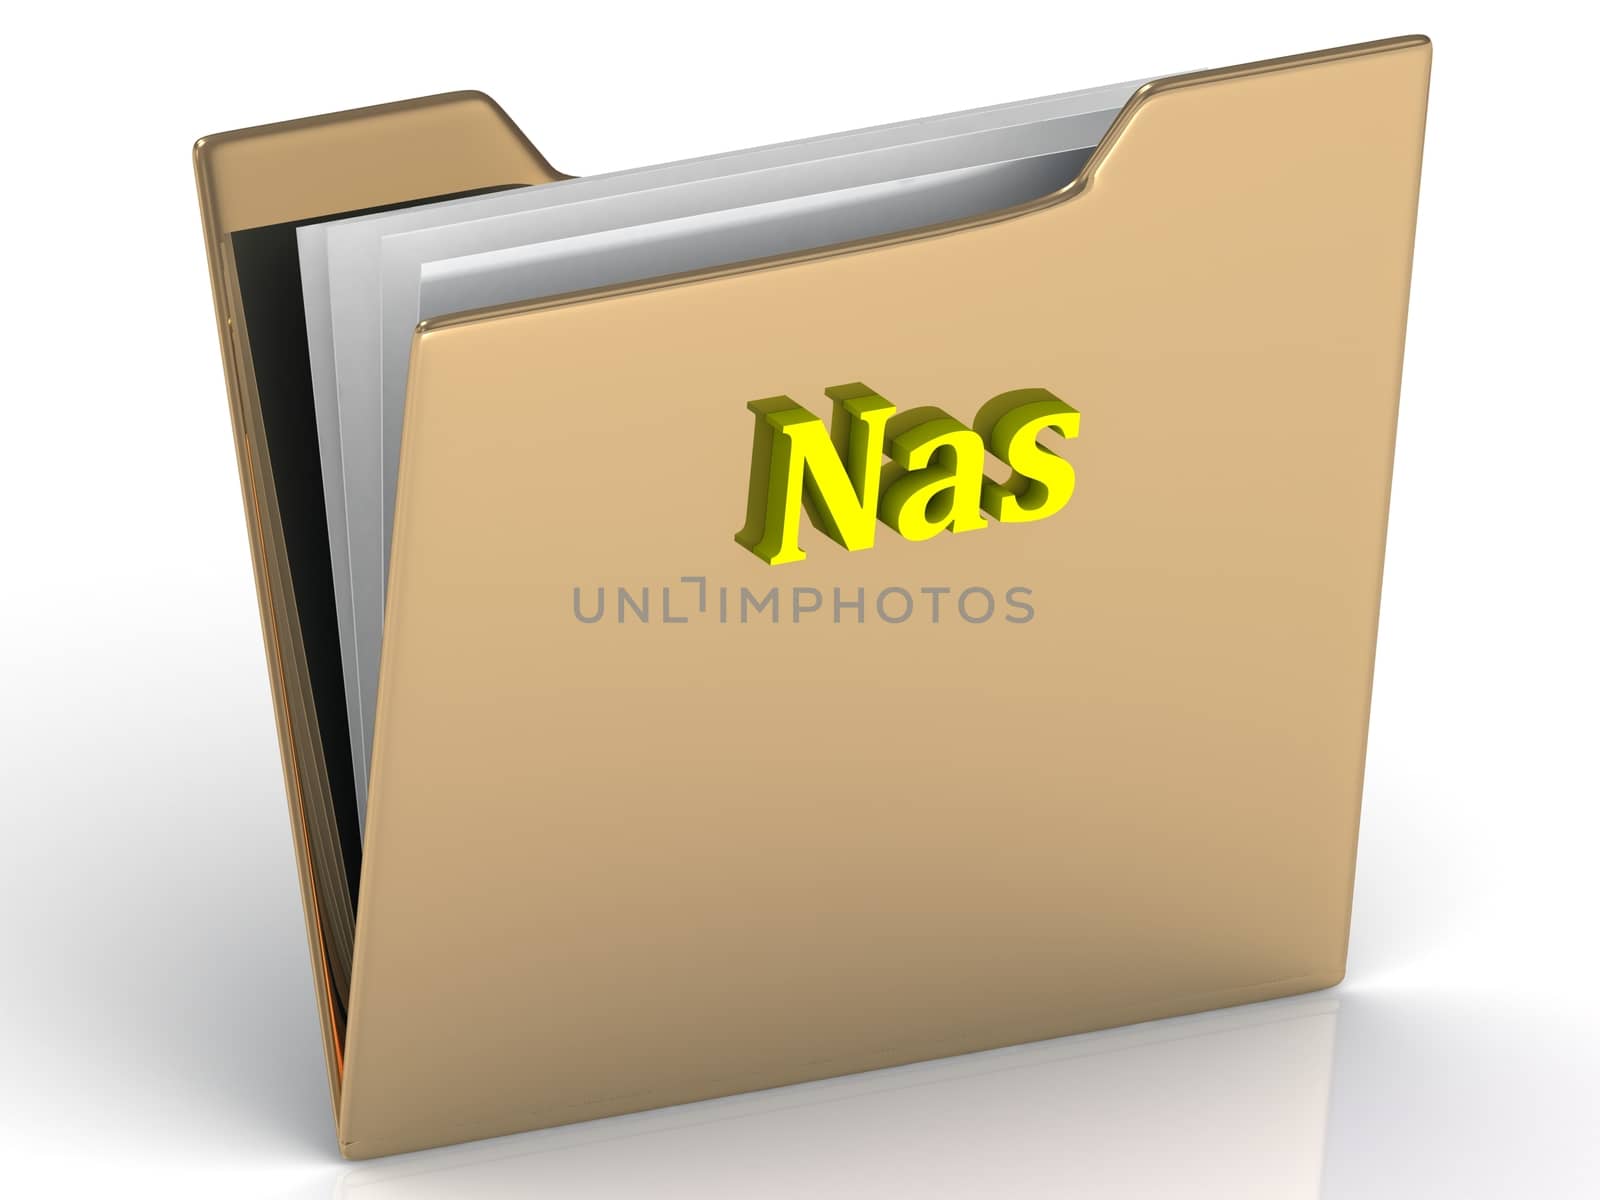 Nas- bright color letters on a gold folder by GreenMost